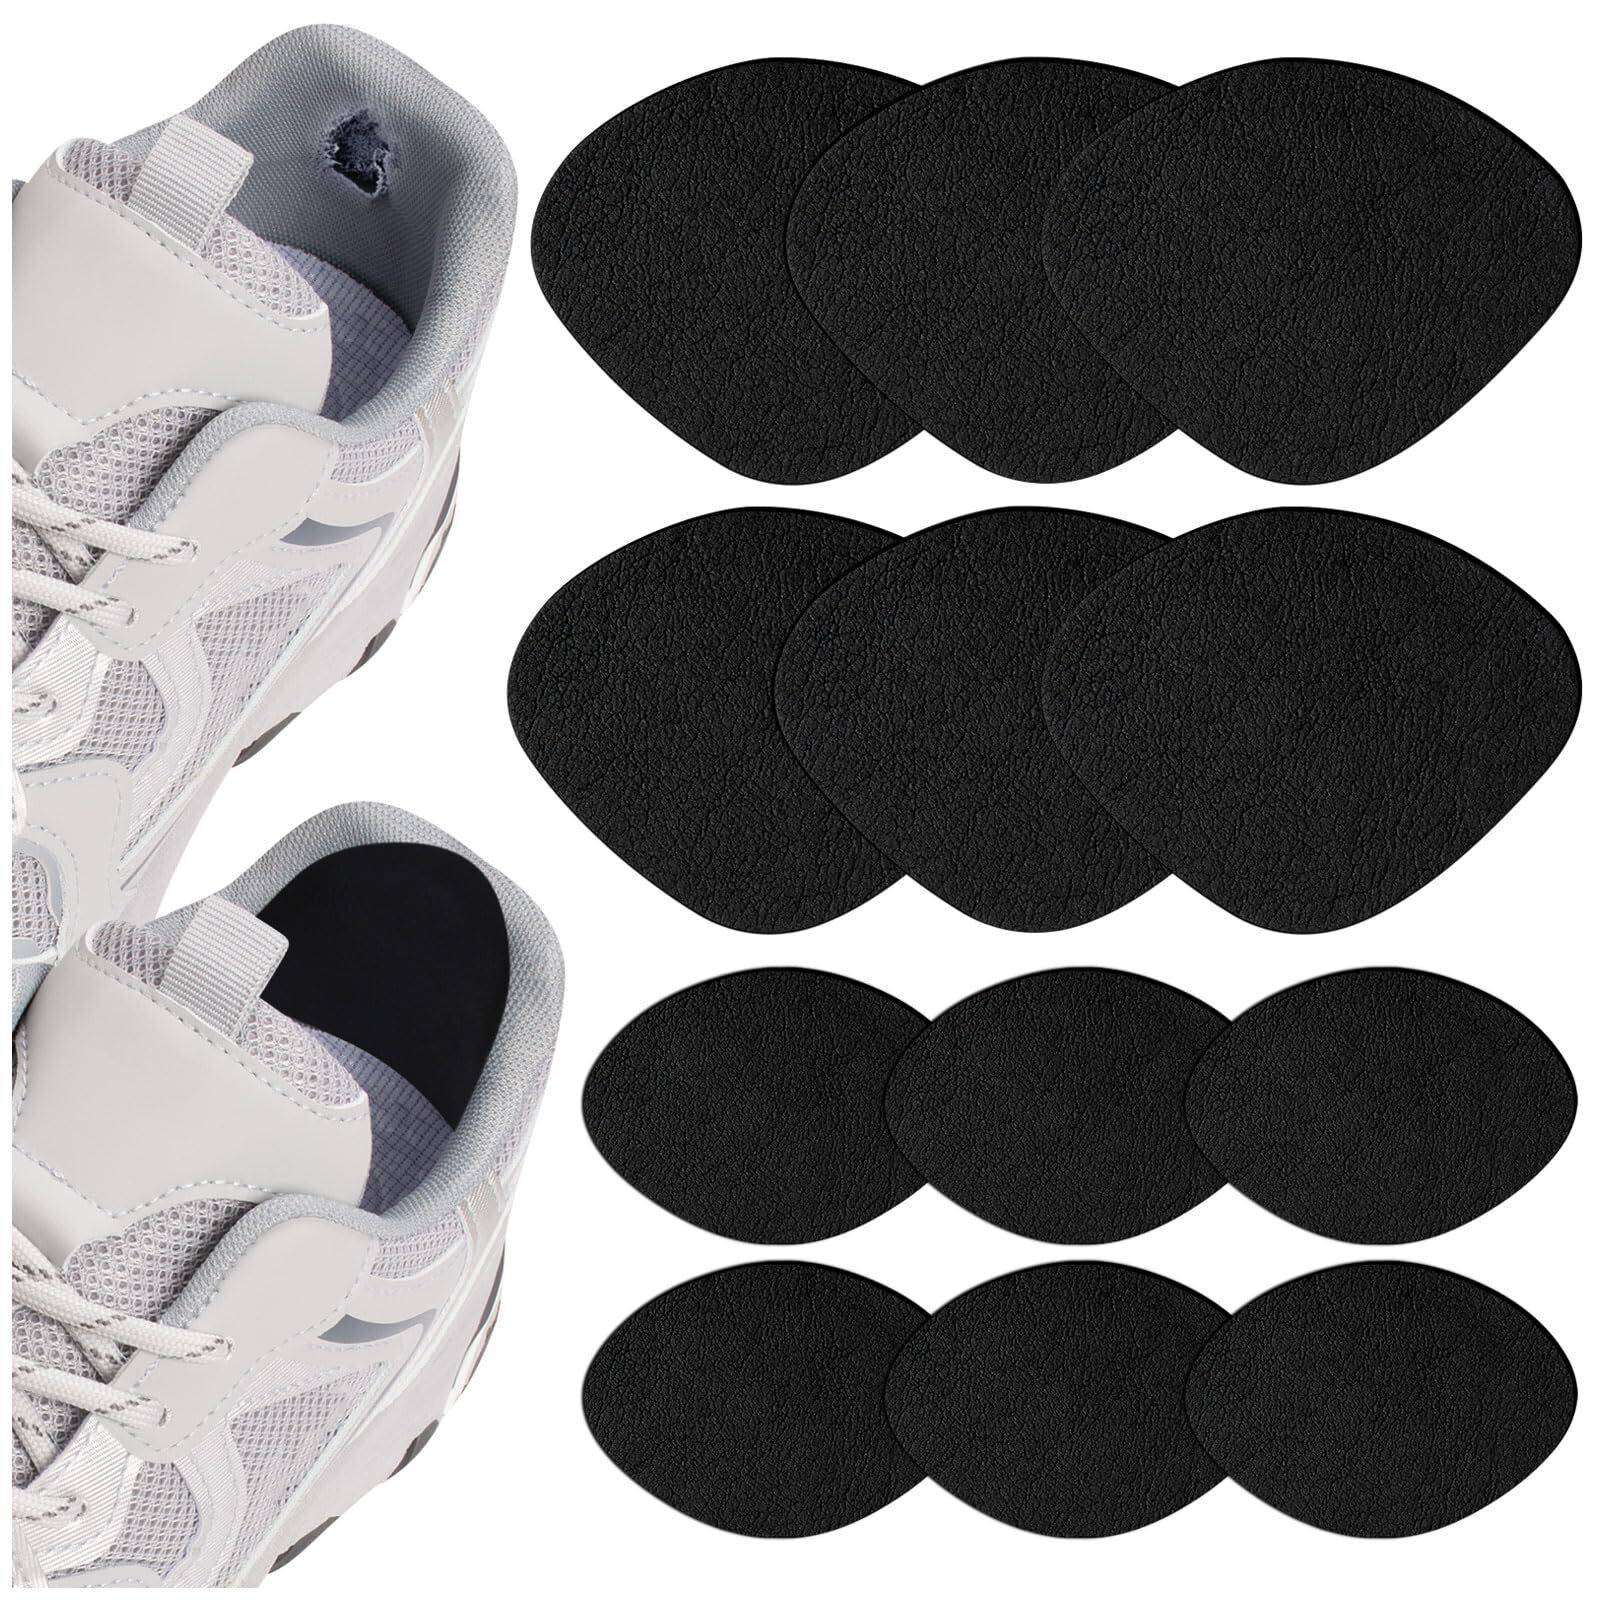 Fancy 6 Pair Shoe Heel Repair, 6 Pairs Self-Adhesive Inside Shoe Patches for Holes,… on eBay